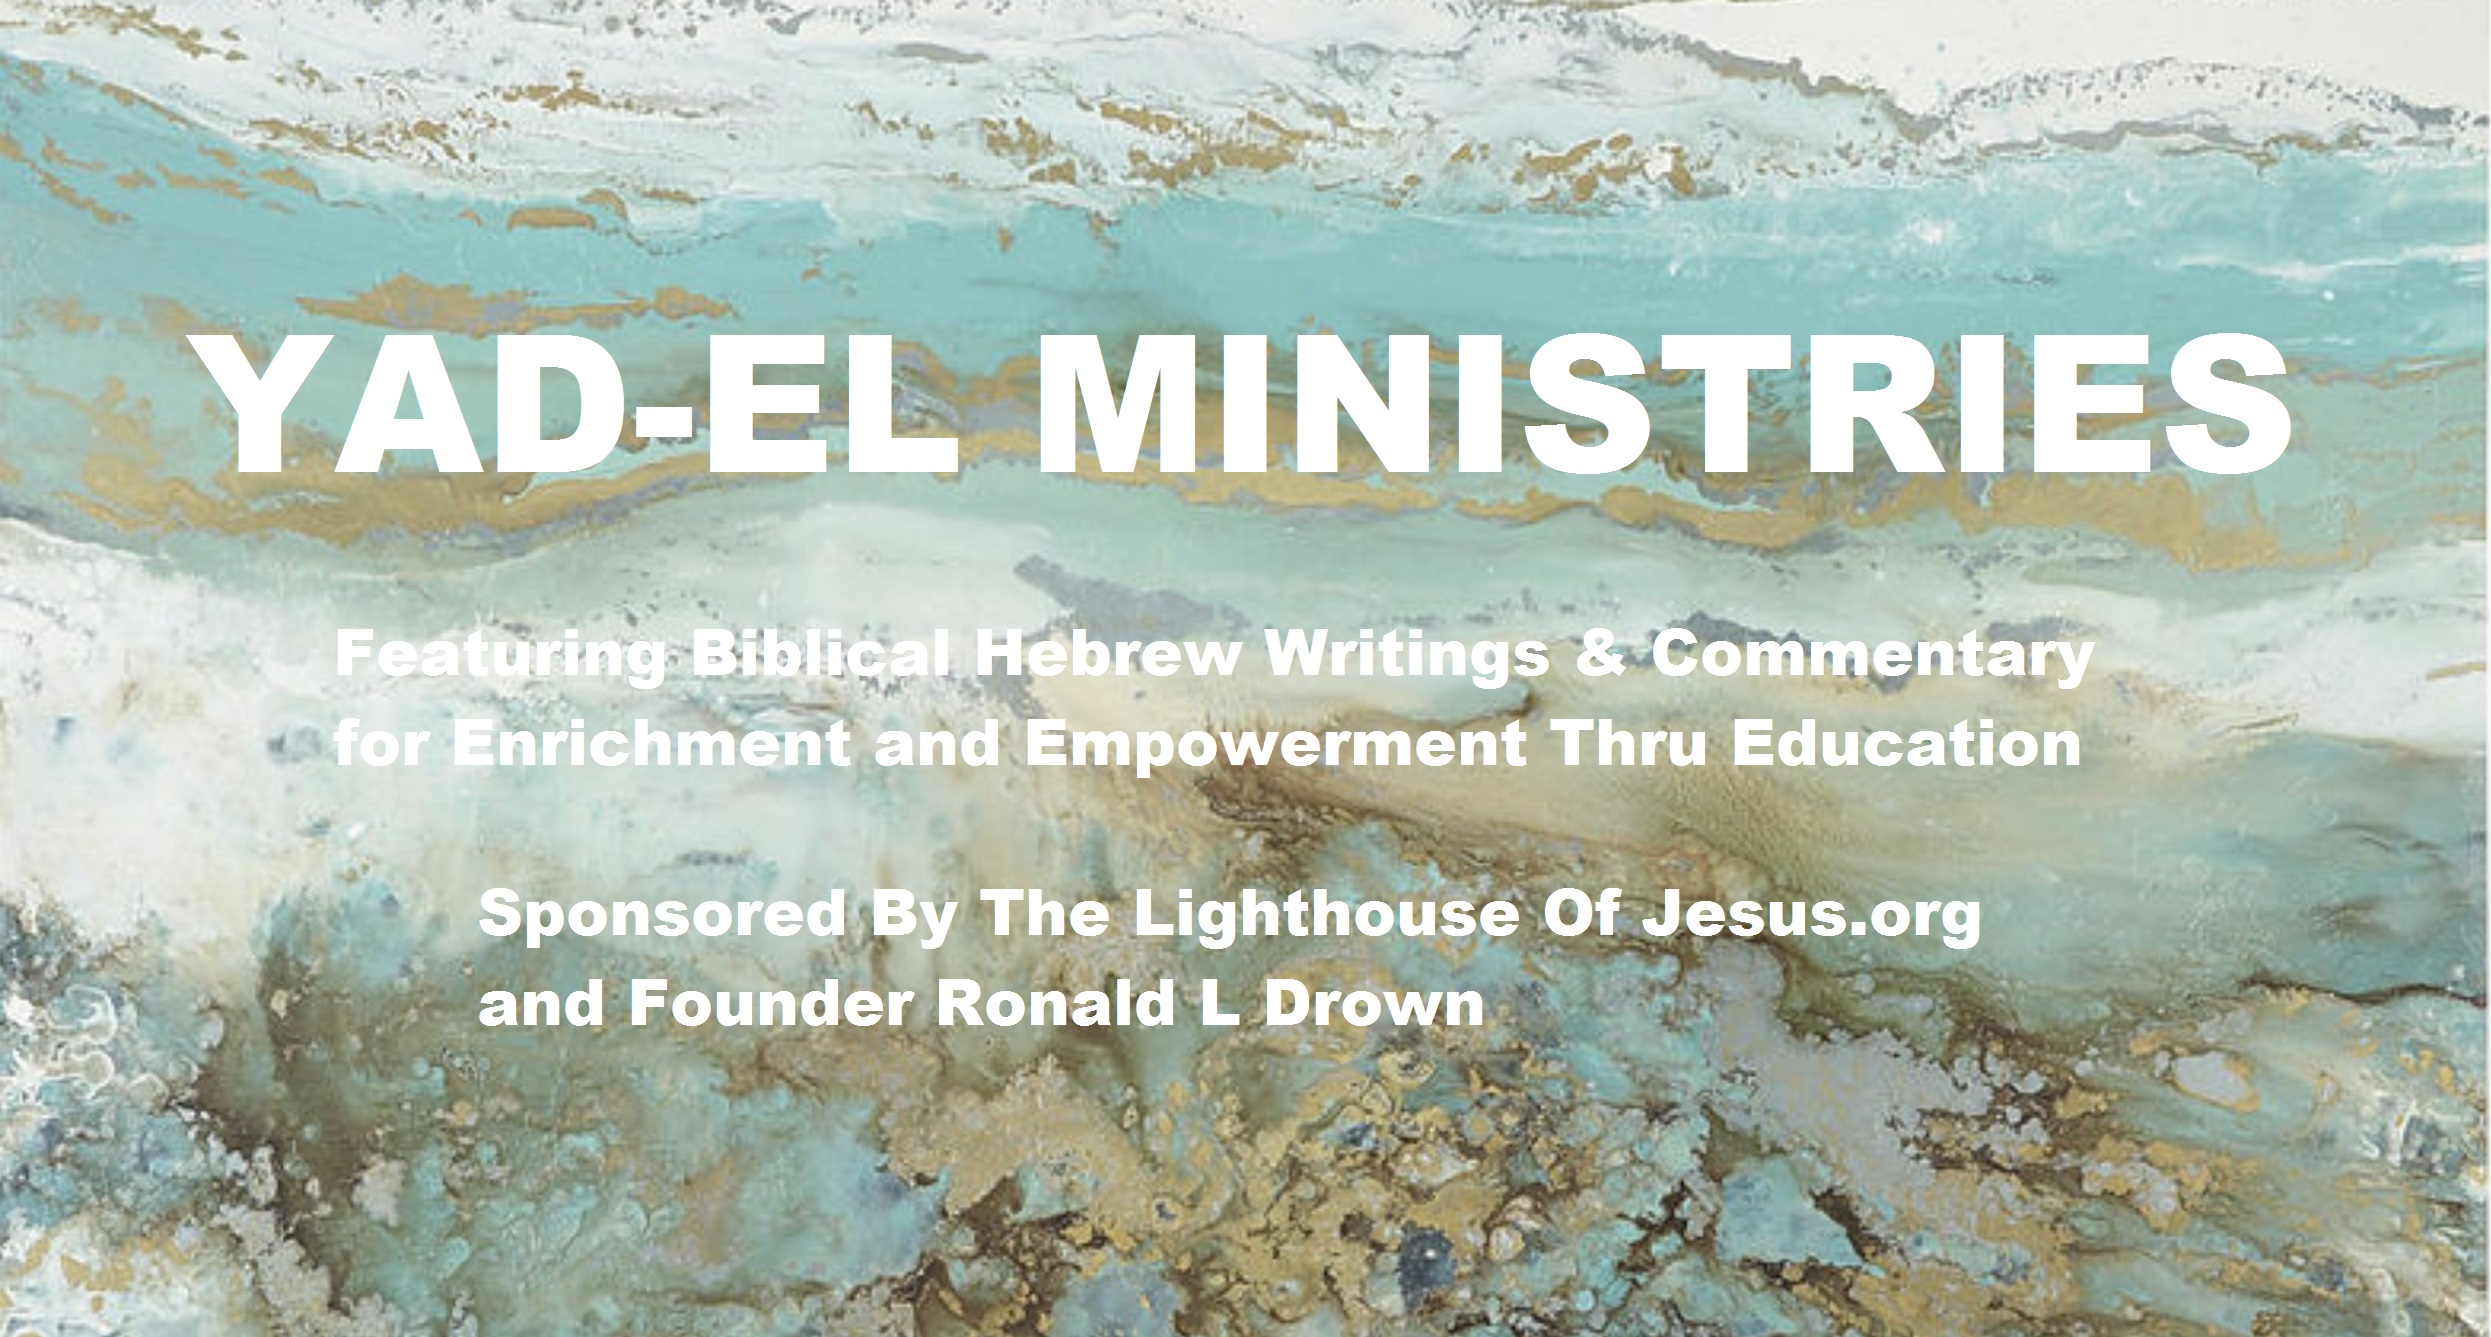 Yad-El Ministries - Featuring Biblical Hebrew Writings & Commentary